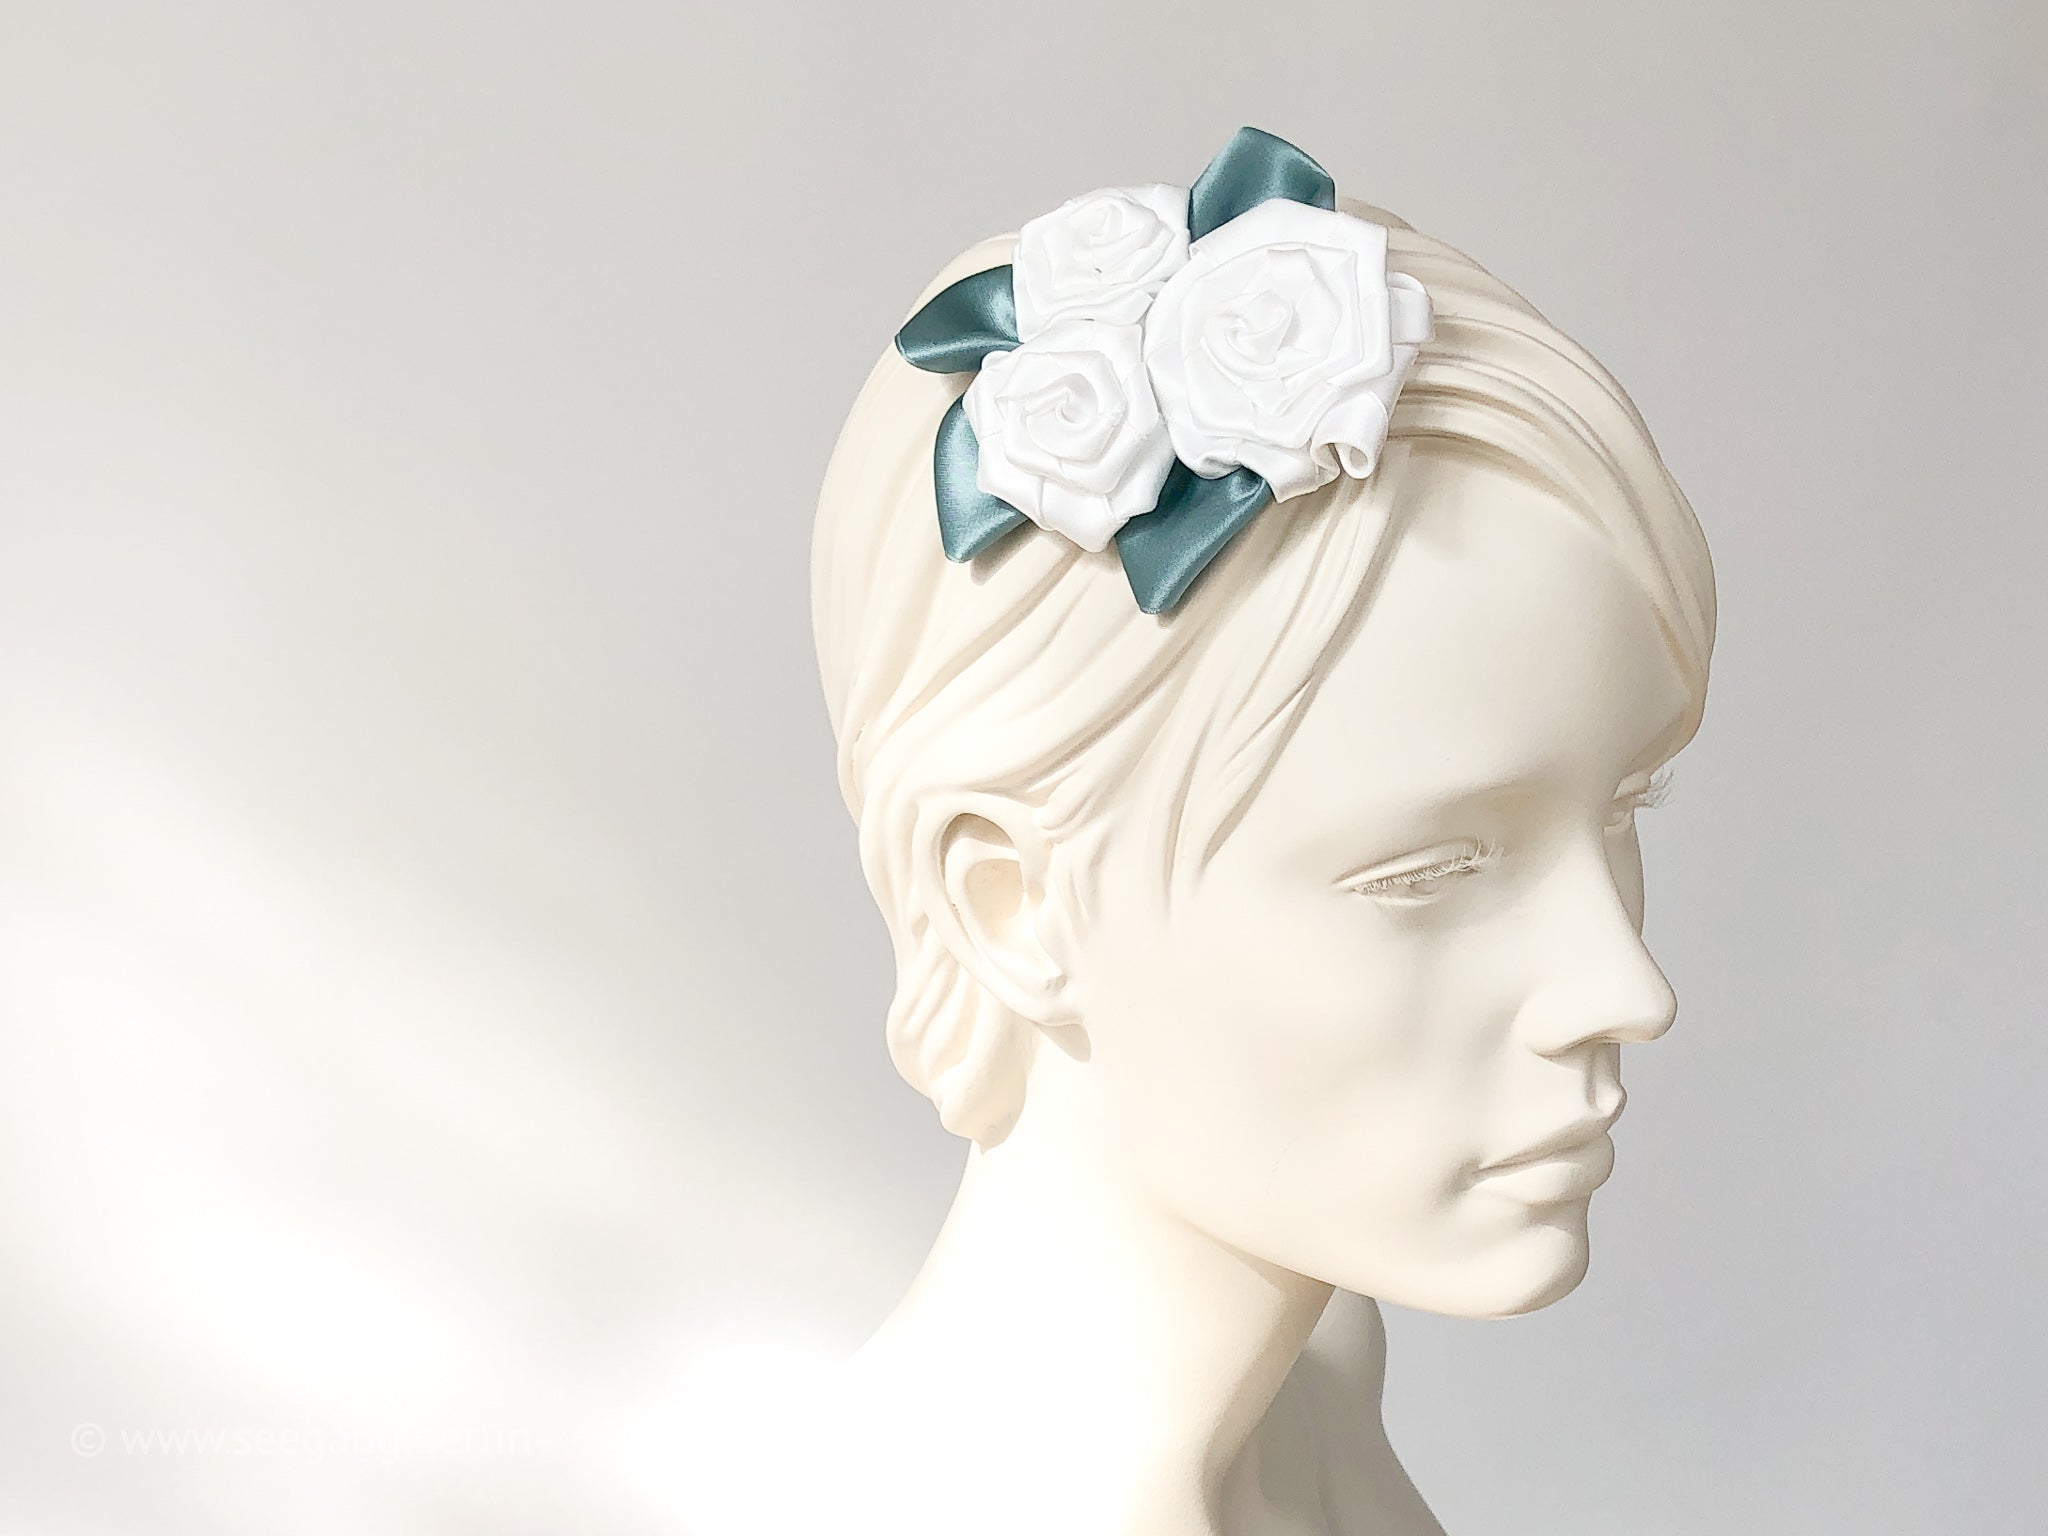 Fascinator, Hair flowers with roses in white, Off white, cream and green leaves.